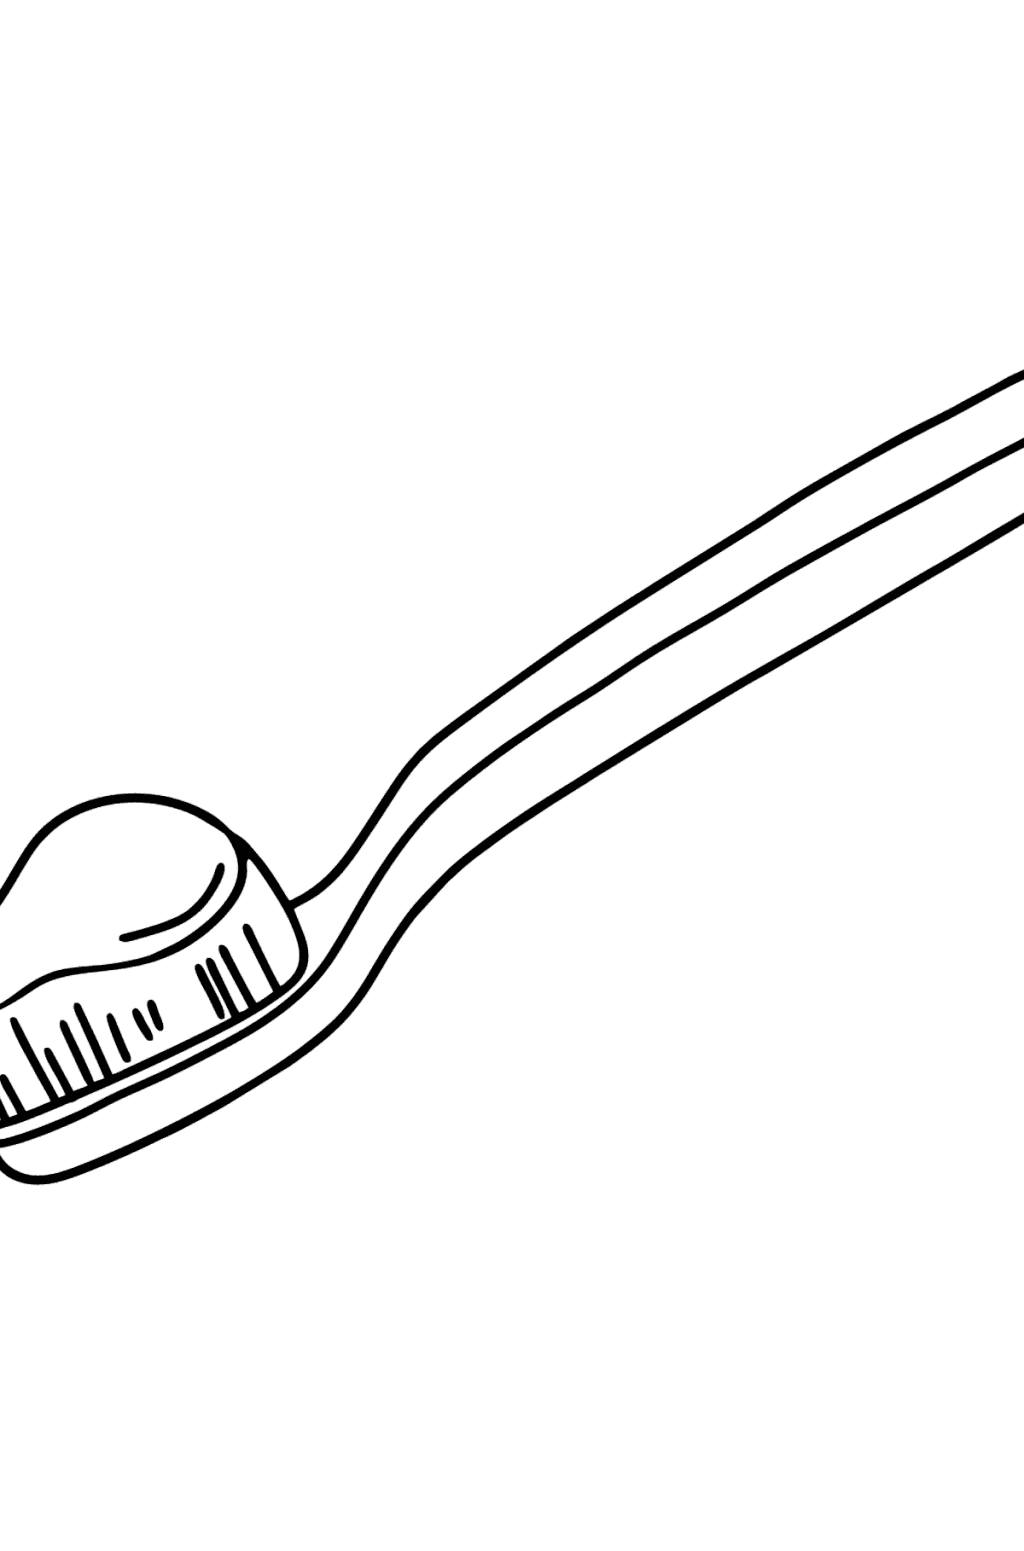 Toothbrush coloring page ♥ for kids Online or Printable for Free!